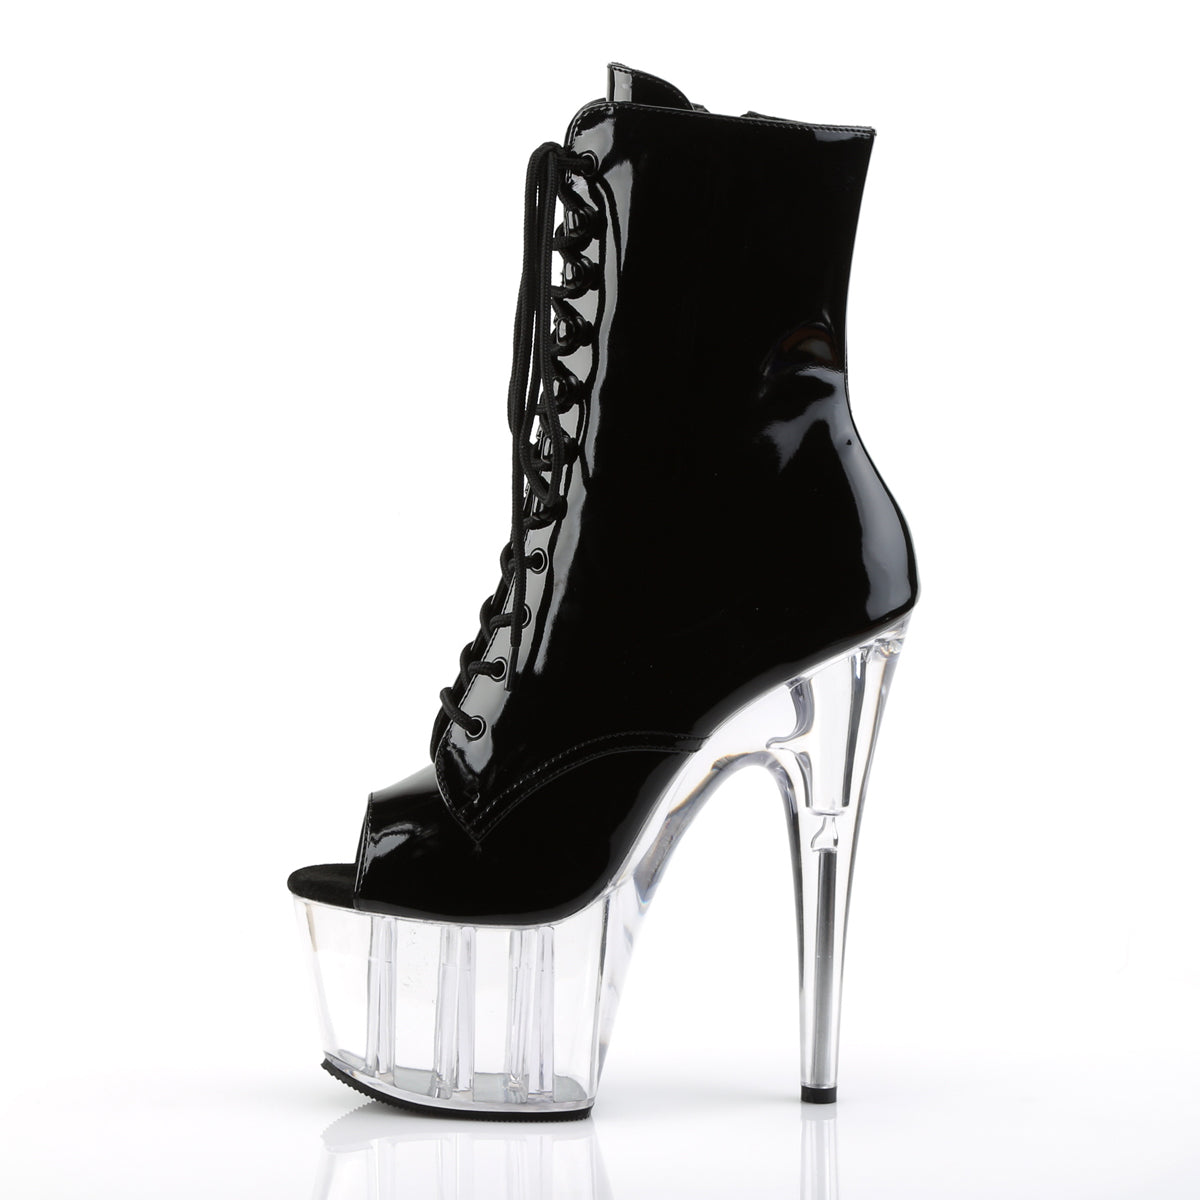 ADORE-1021 7" Heel Black and Clear Pole Dancing Ankle Boots-Pleaser- Sexy Shoes Pole Dance Heels